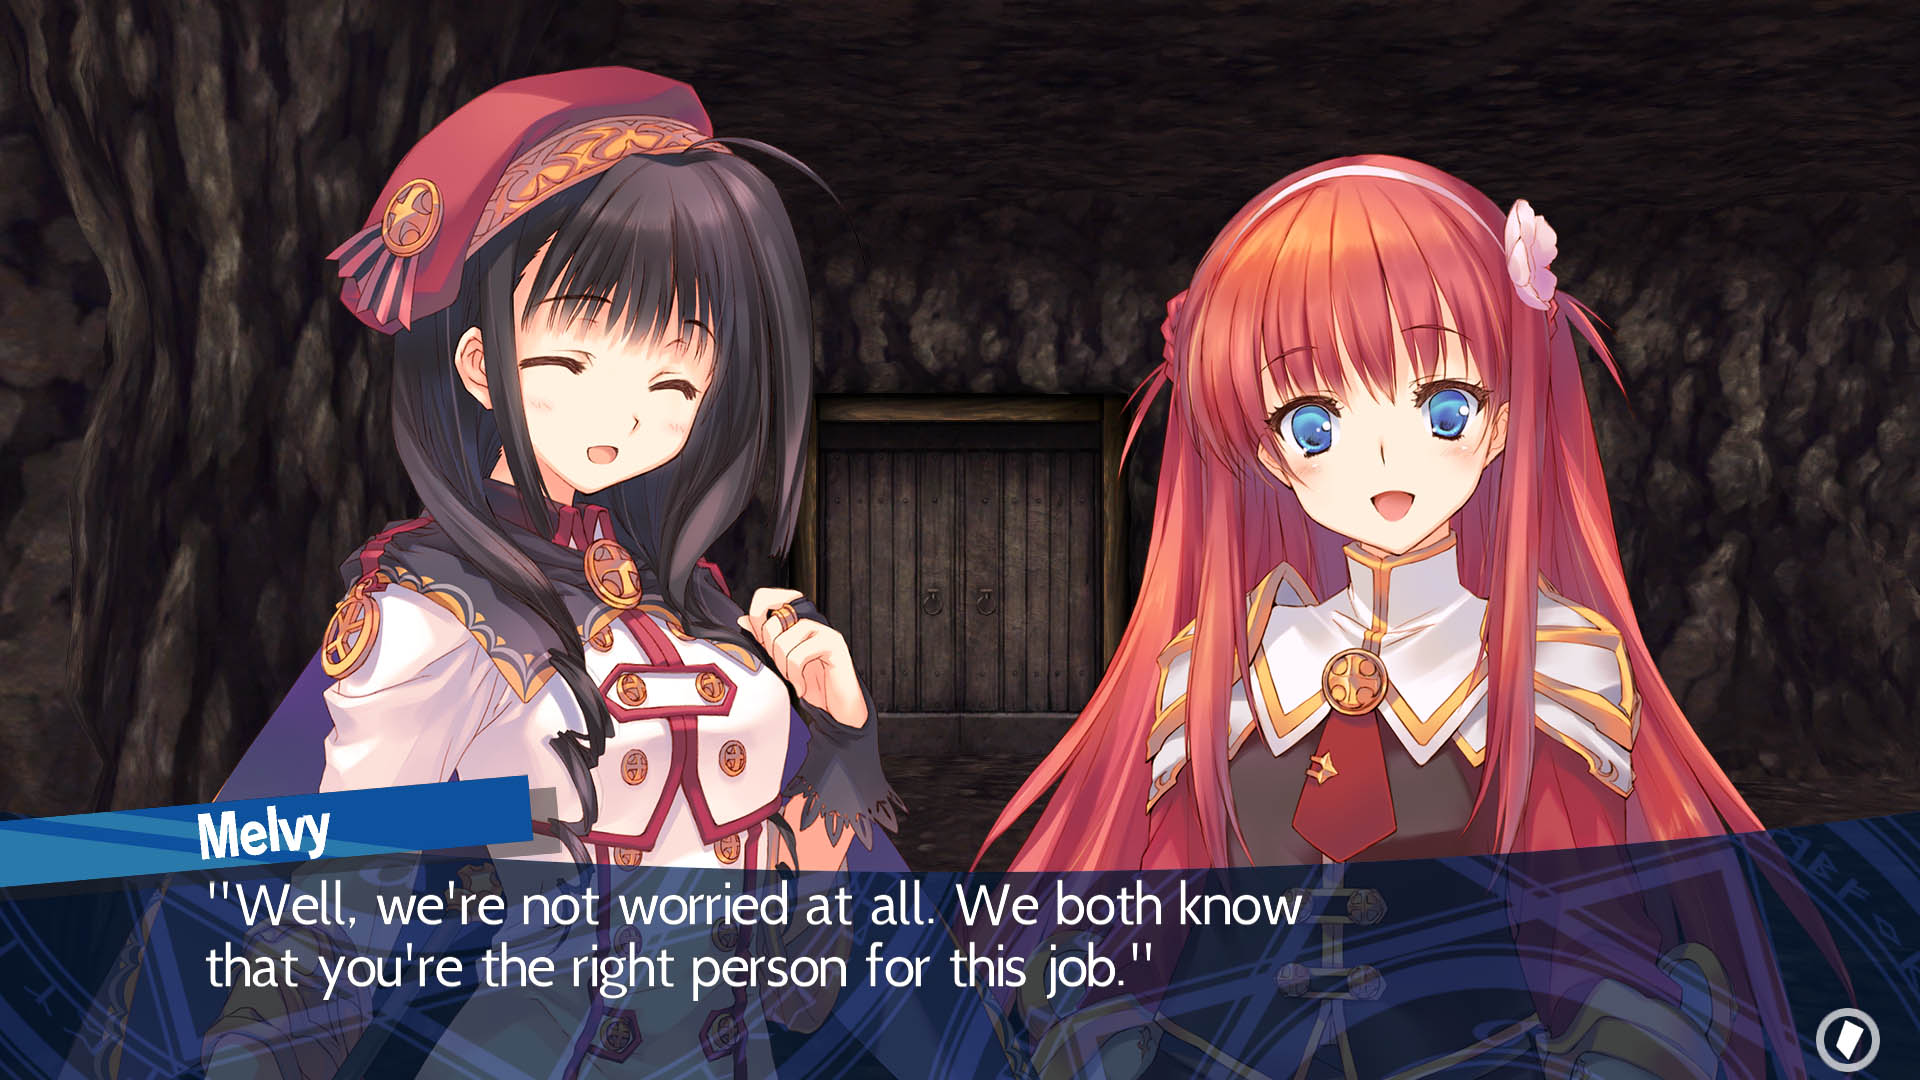 Dungeon Travelers 2: The Royal Library & the Monster Seal (English) - RPG - 1 - Select